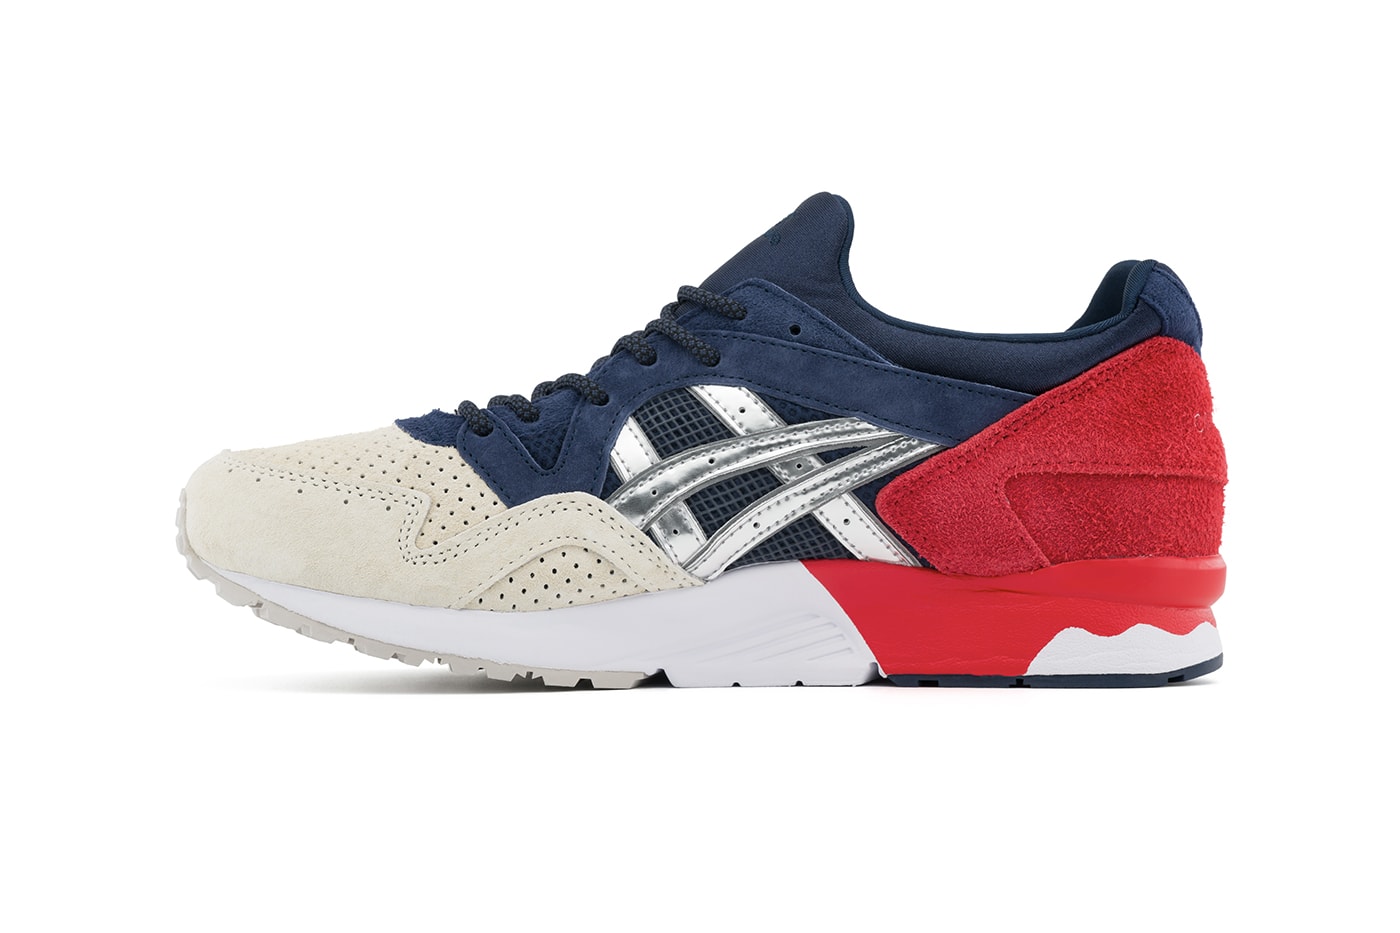 Concepts ASICS libertea gel lyte v sneaker launch 30th anniversary Deon Point release info date price